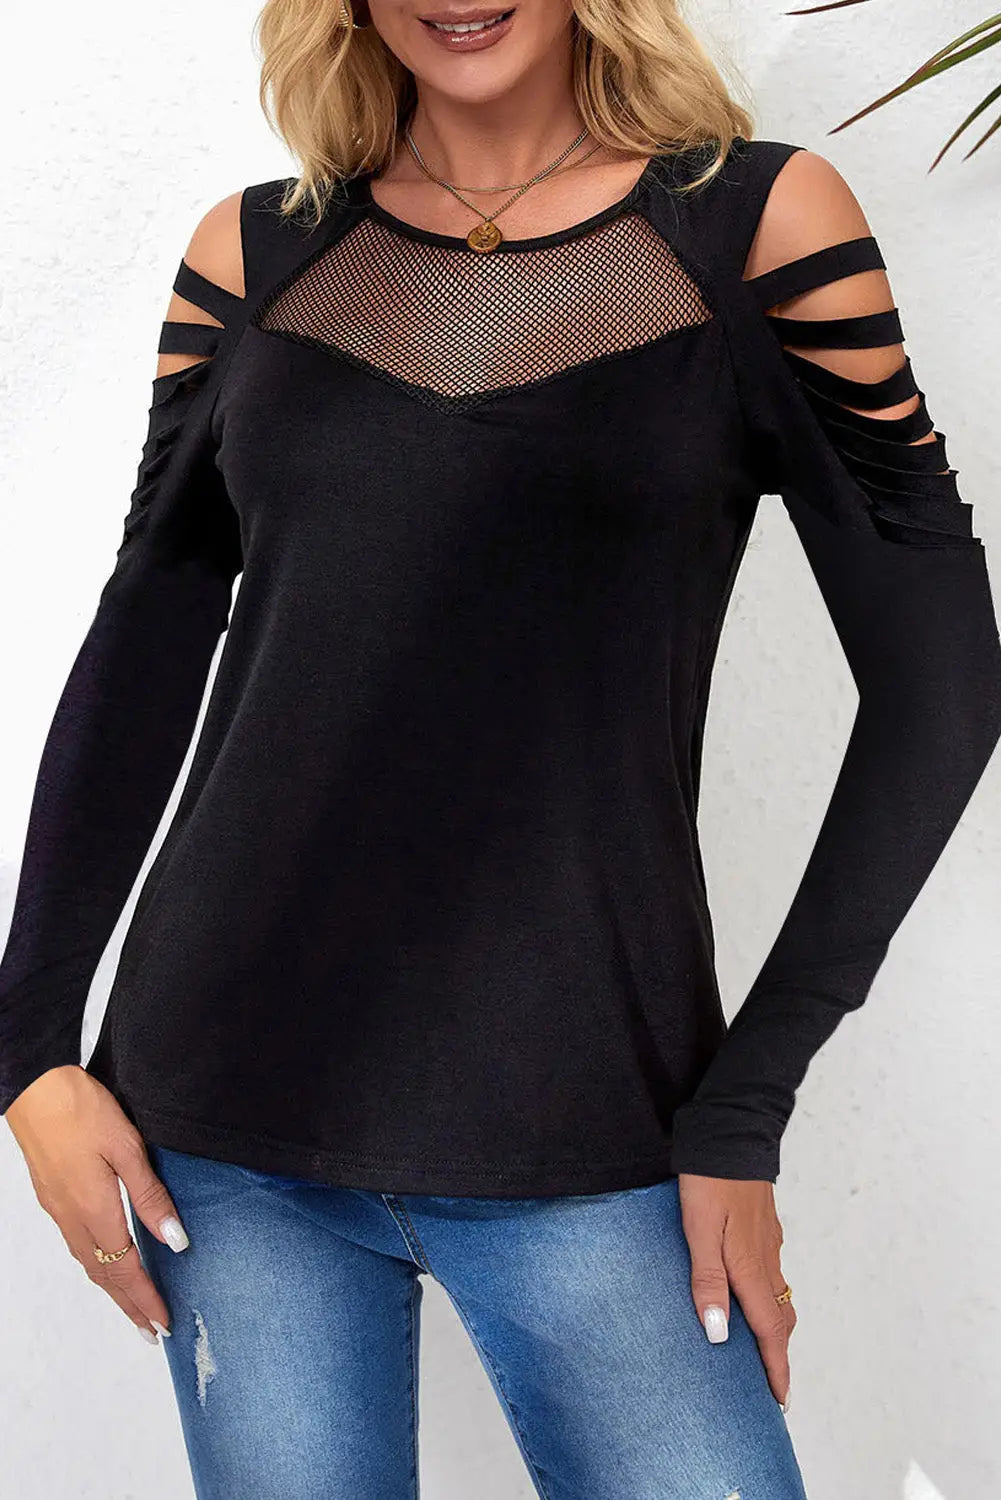 Black mesh patch ripped long sleeve top - s / 65% polyester + 30% viscose + 5% elastane - tops